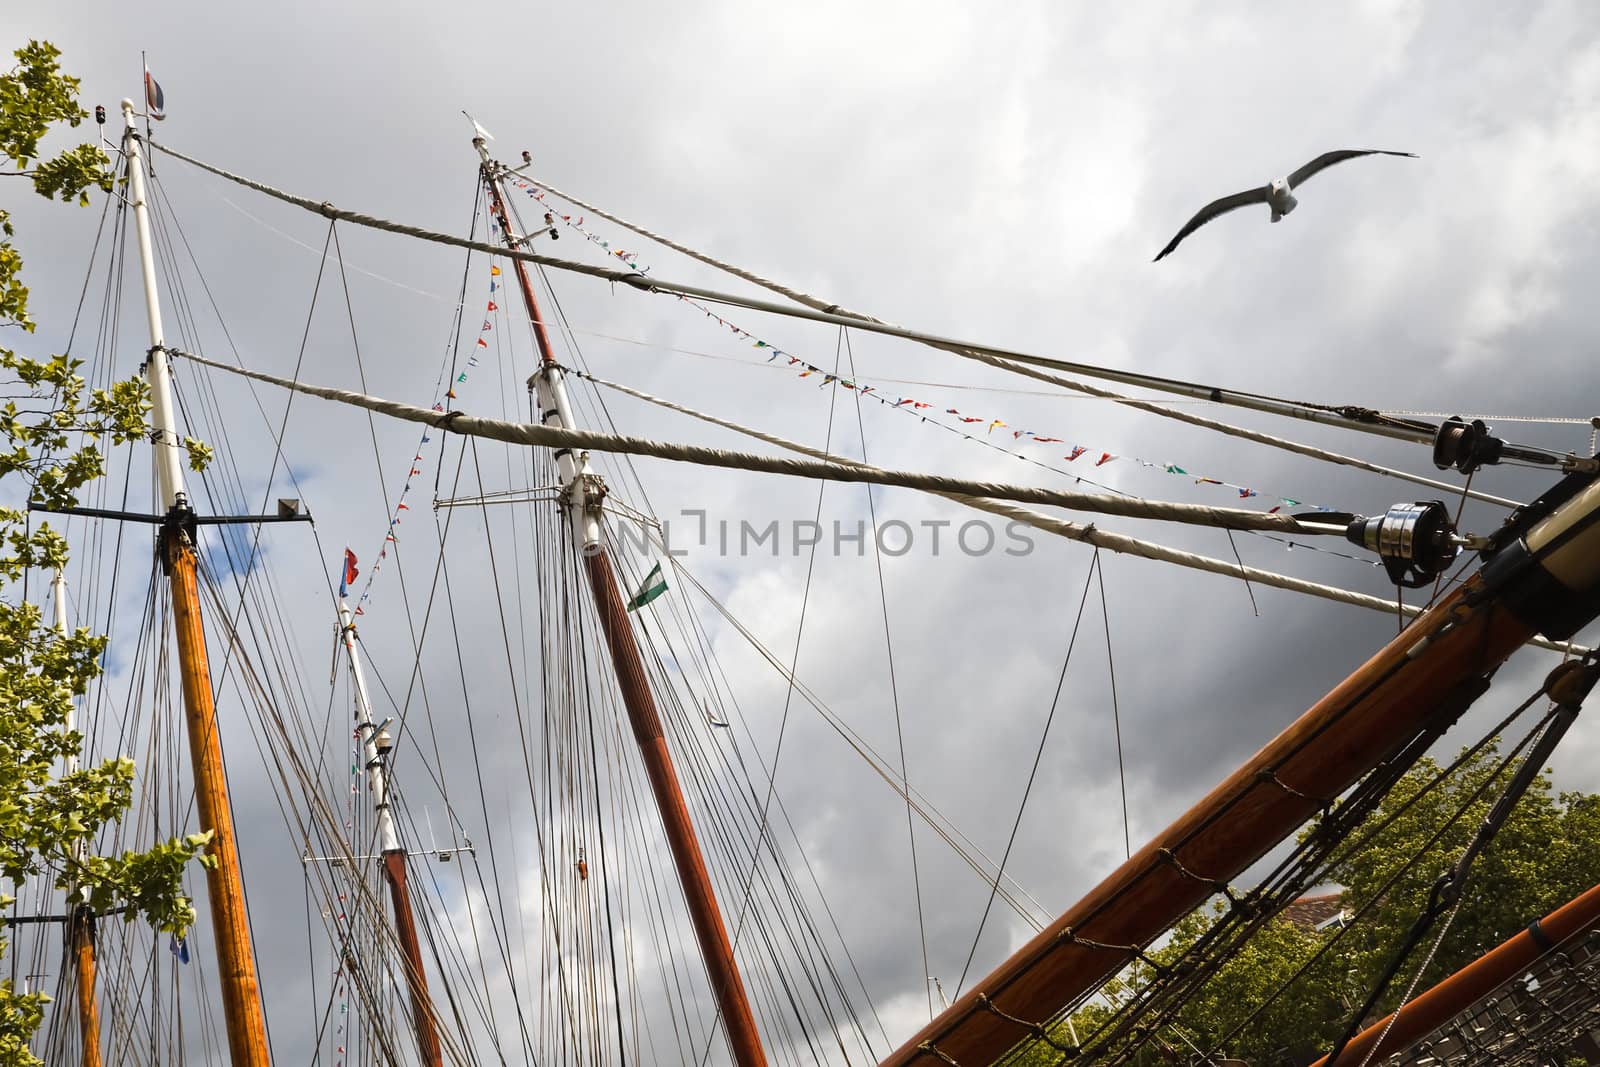 Masts, ropes and flags on sailing ships with rainclouds in background